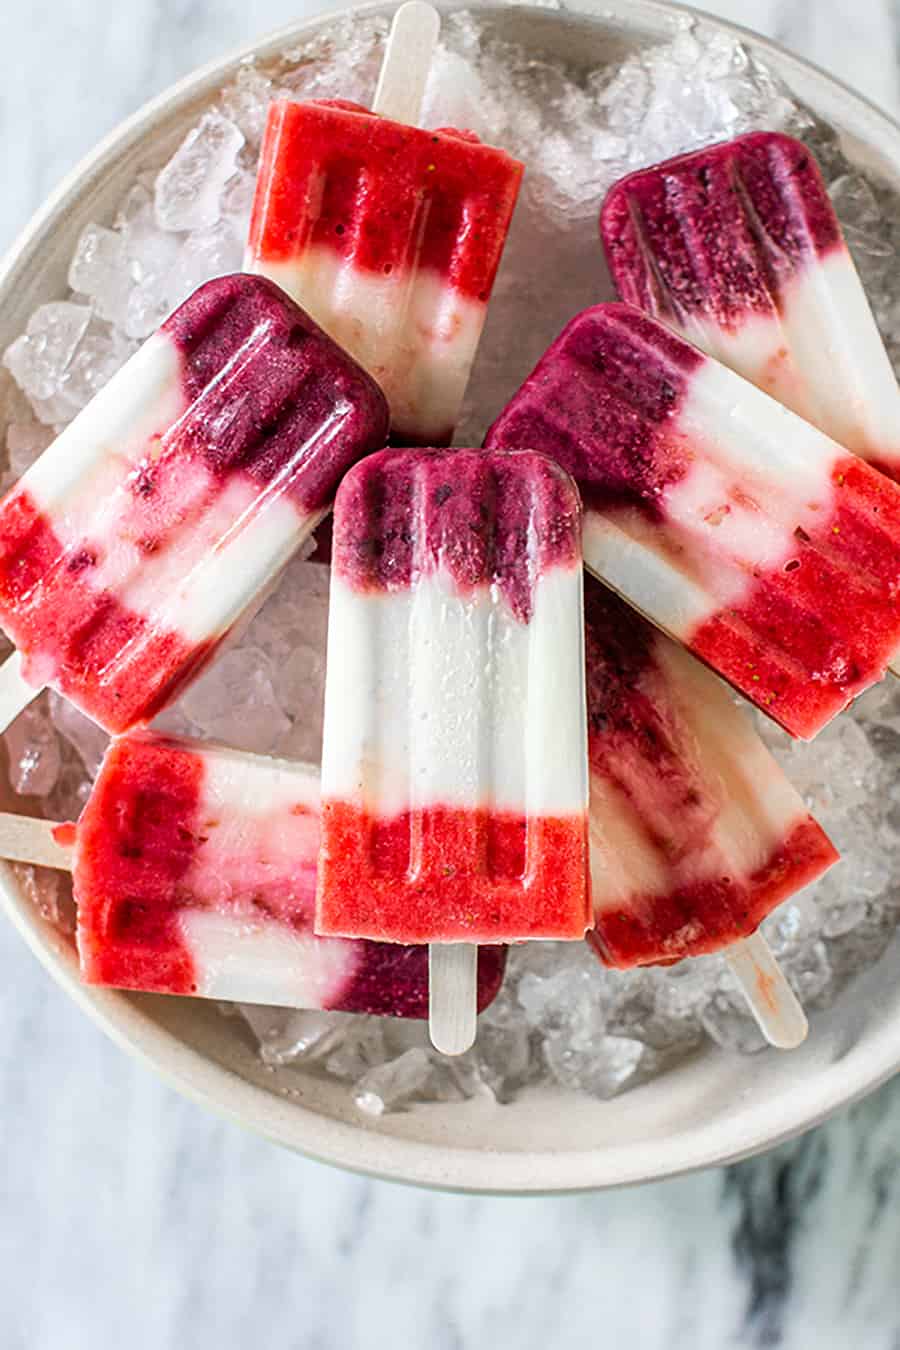 7 red, white, and blue popsicles in a bowl of ice.